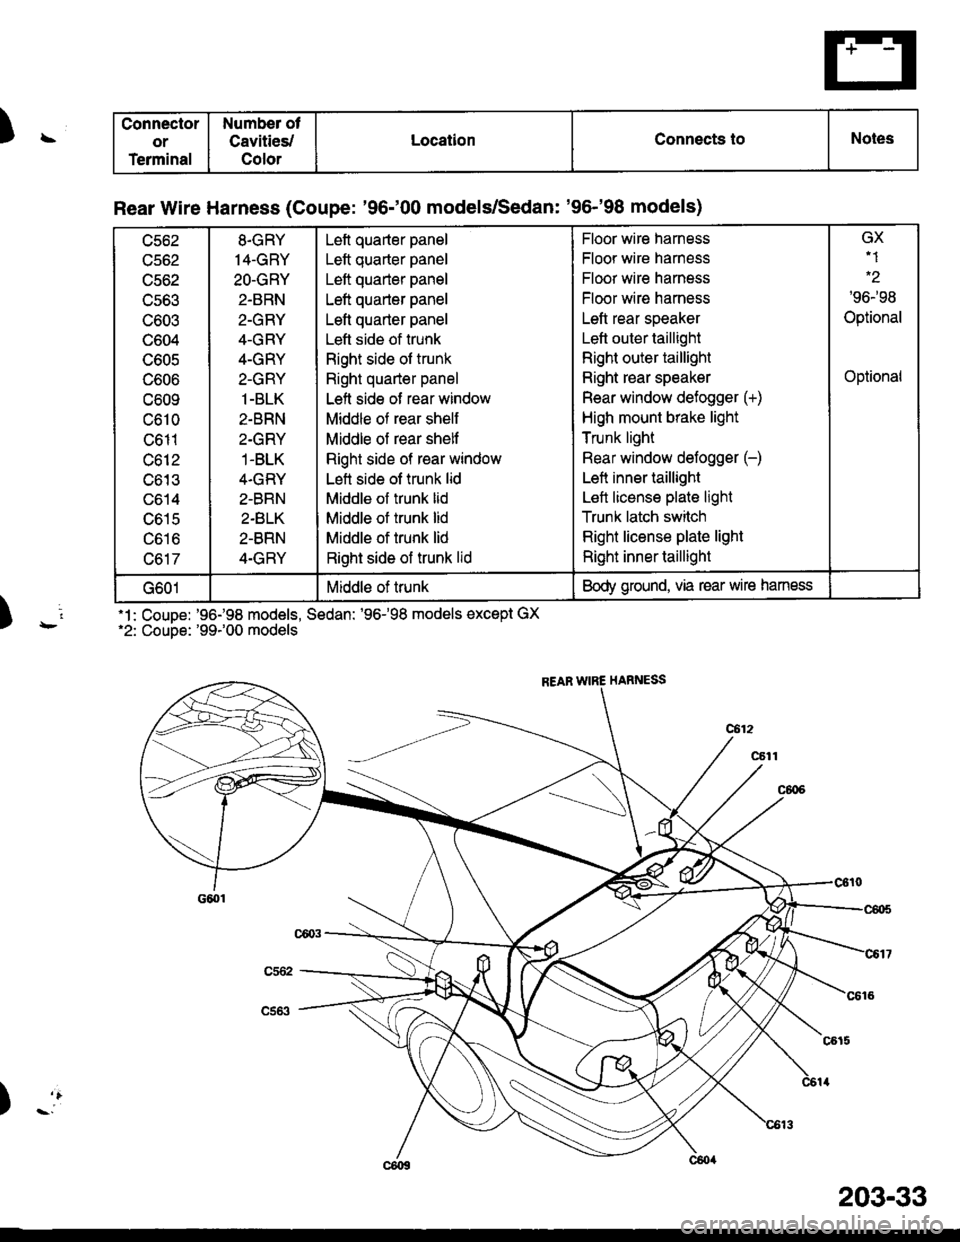 HONDA CIVIC 1996 6.G Service Manual )\
)rl
) -:
.1: CouDe: 96198 models, Sedan: 96-98 models except GX2: CouDe: 99r00 models
Connector
or
Terminal
Number ot
Cavities/
Color
LocatlonConnects toNotes
Rear Wire Harness (Coupe: 96-00